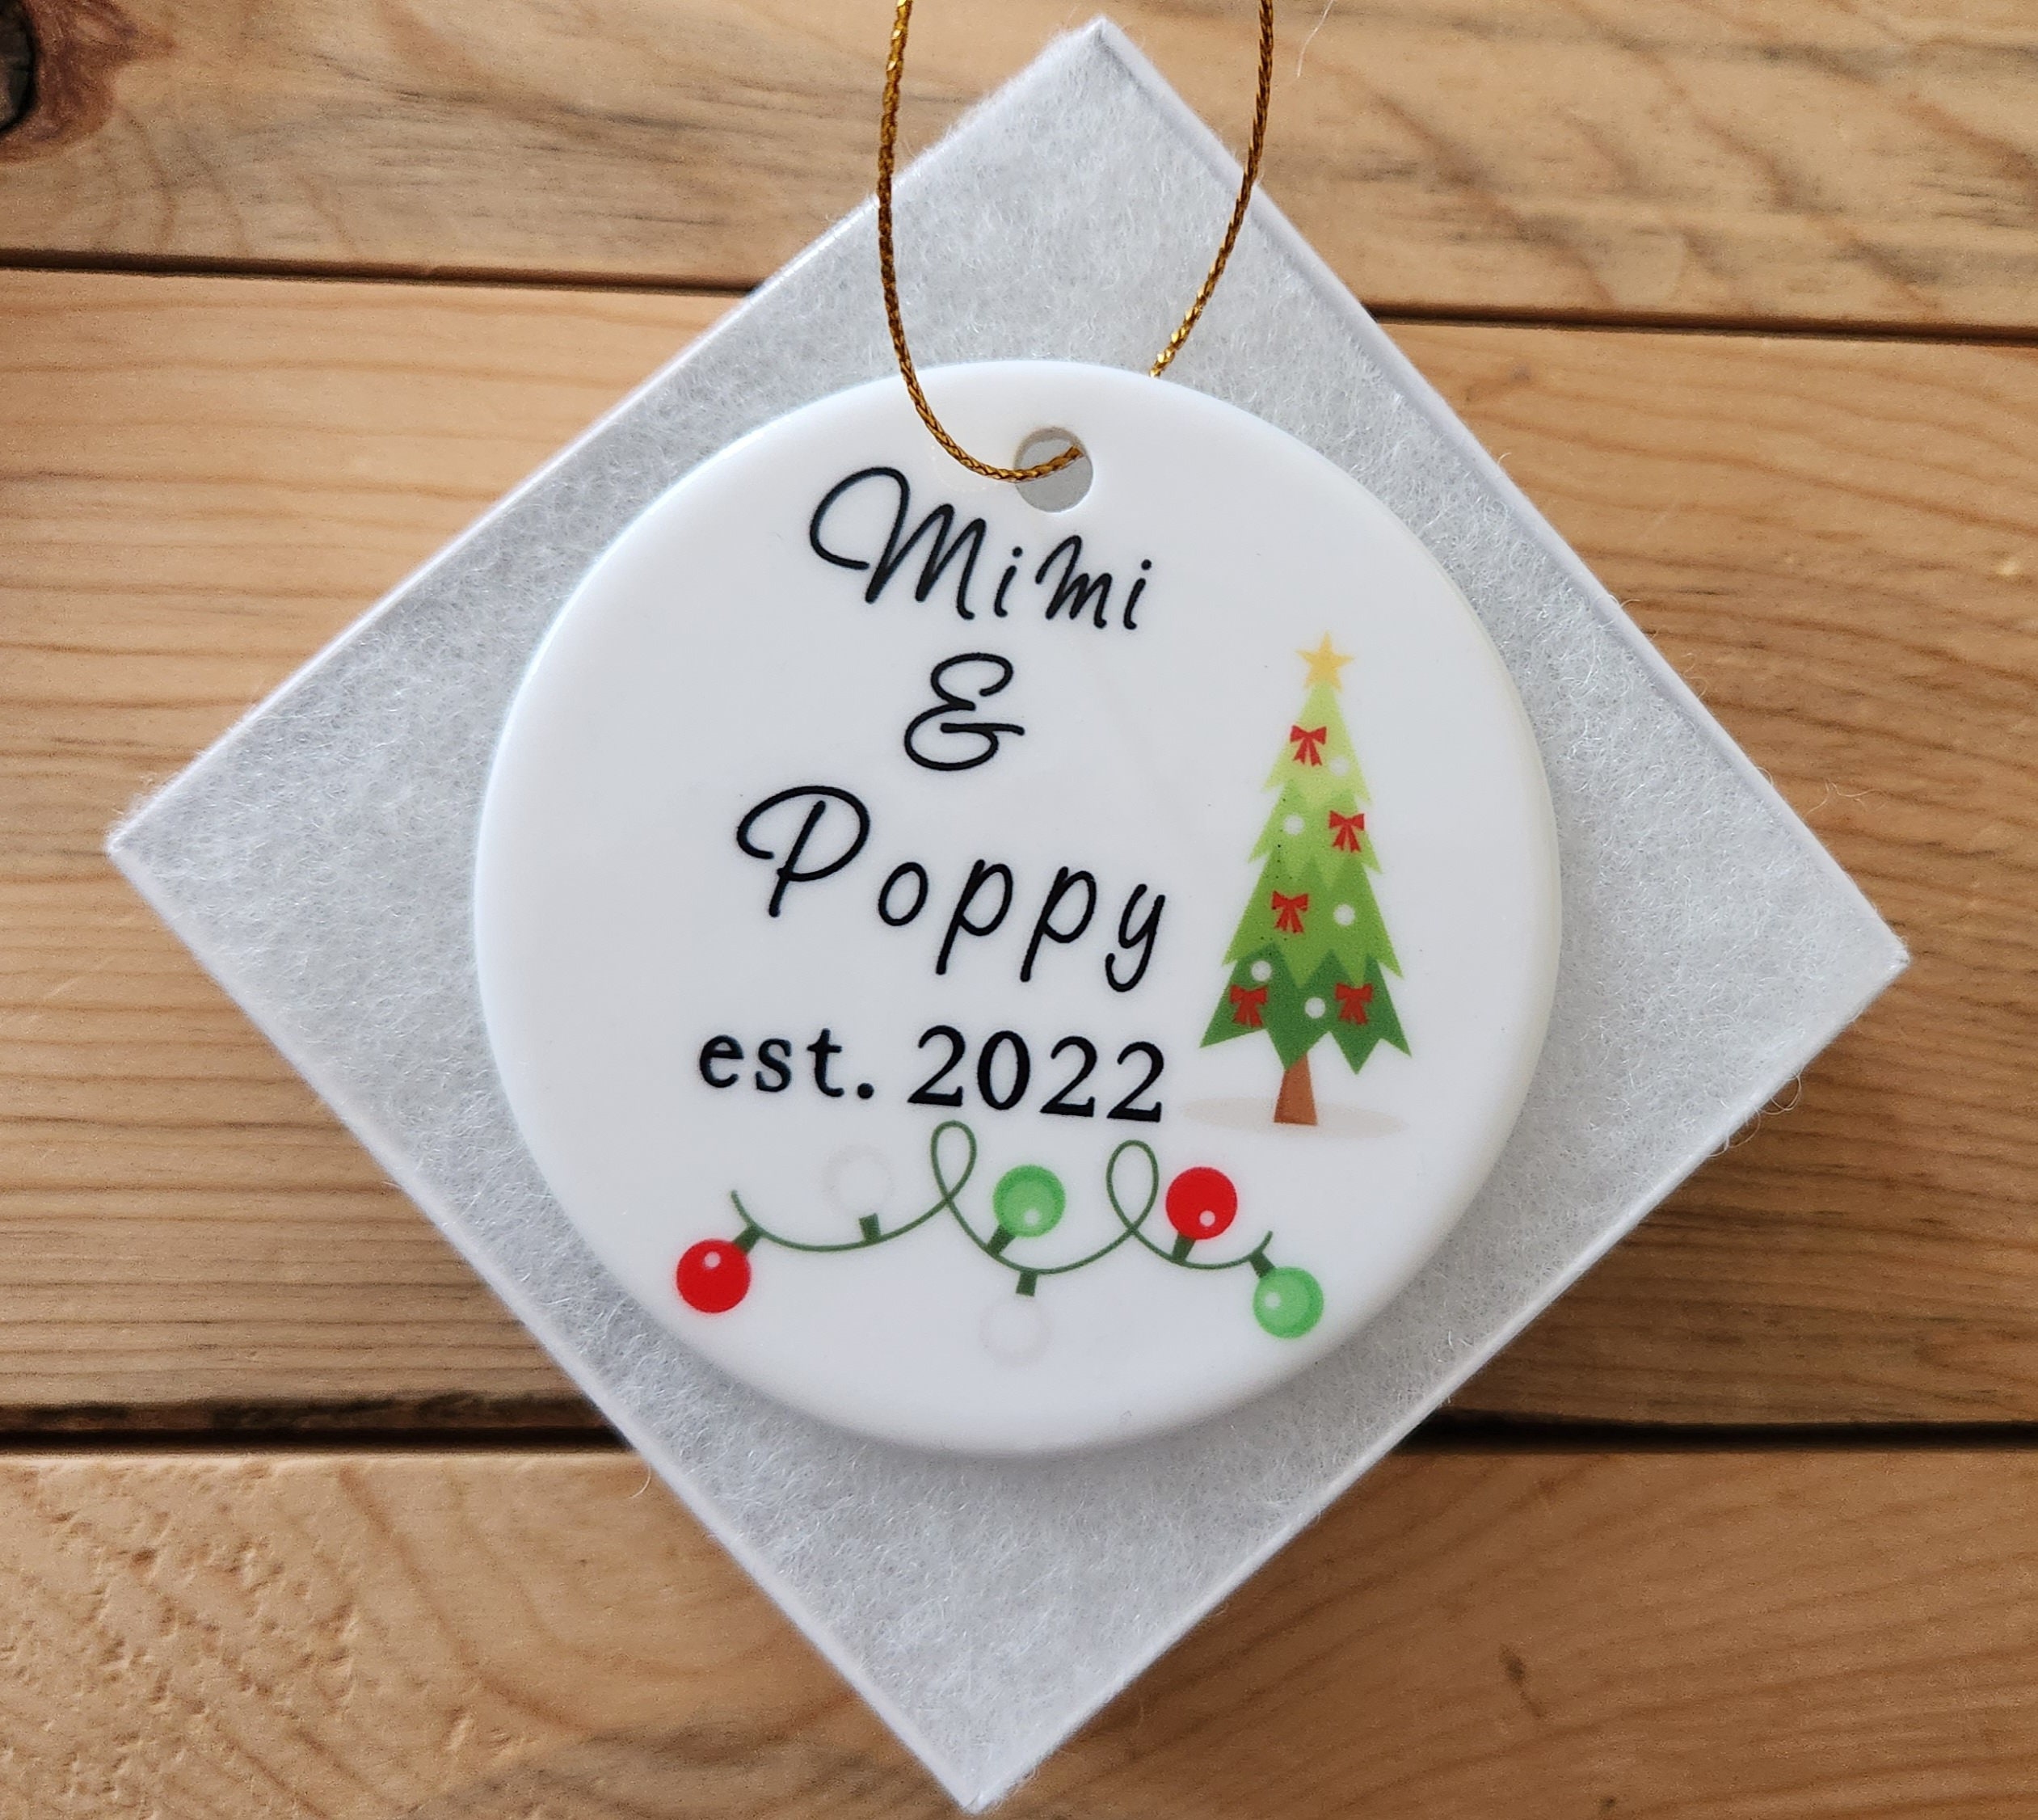 Mimi and Poppy Personalized Ornament Grandparent Christmas